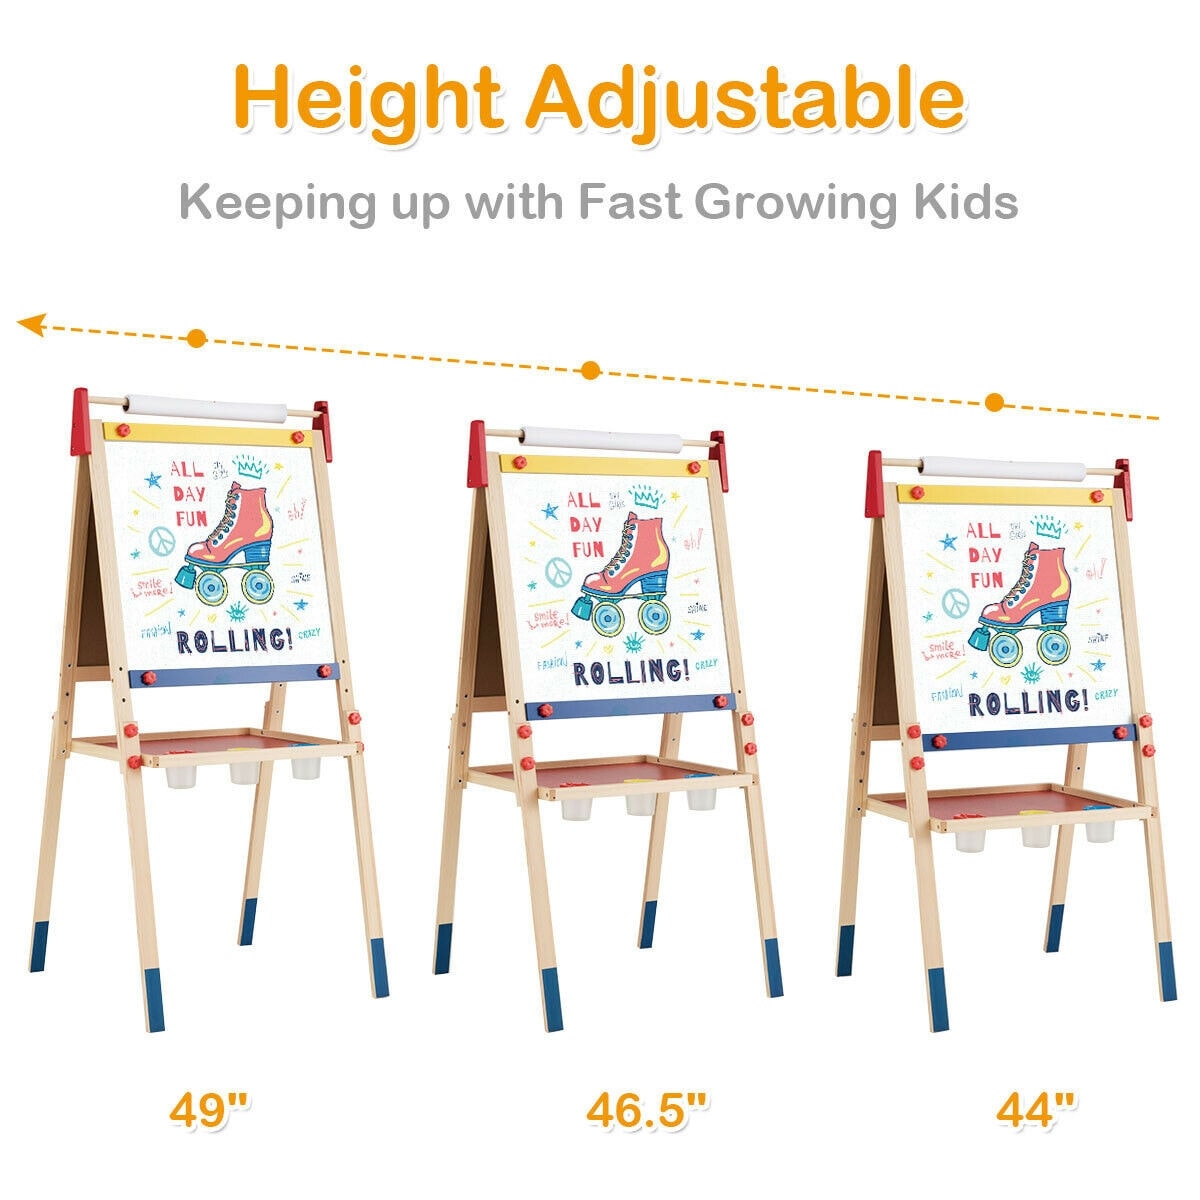 https://ak1.ostkcdn.com/images/products/is/images/direct/910c7f345ce2b4b4f49db3cc39502a3394cb4bdf/All-in-One-Wooden-Height-Adjustable-Kid%27s-Art-Easel.jpg